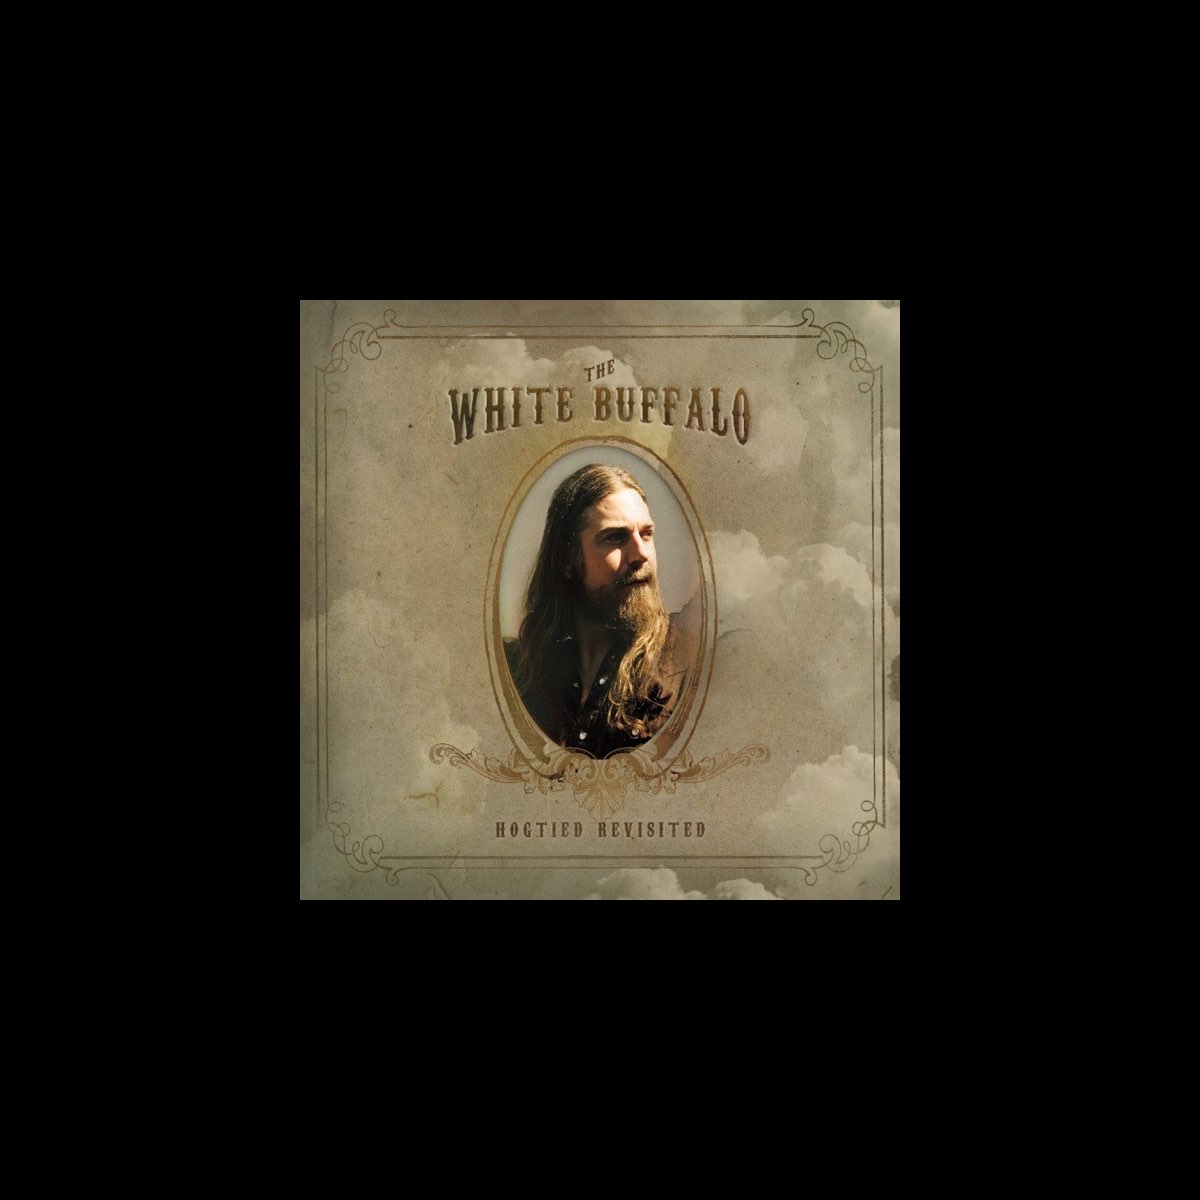 Hogtied Revisited by The White Buffalo on Apple Music